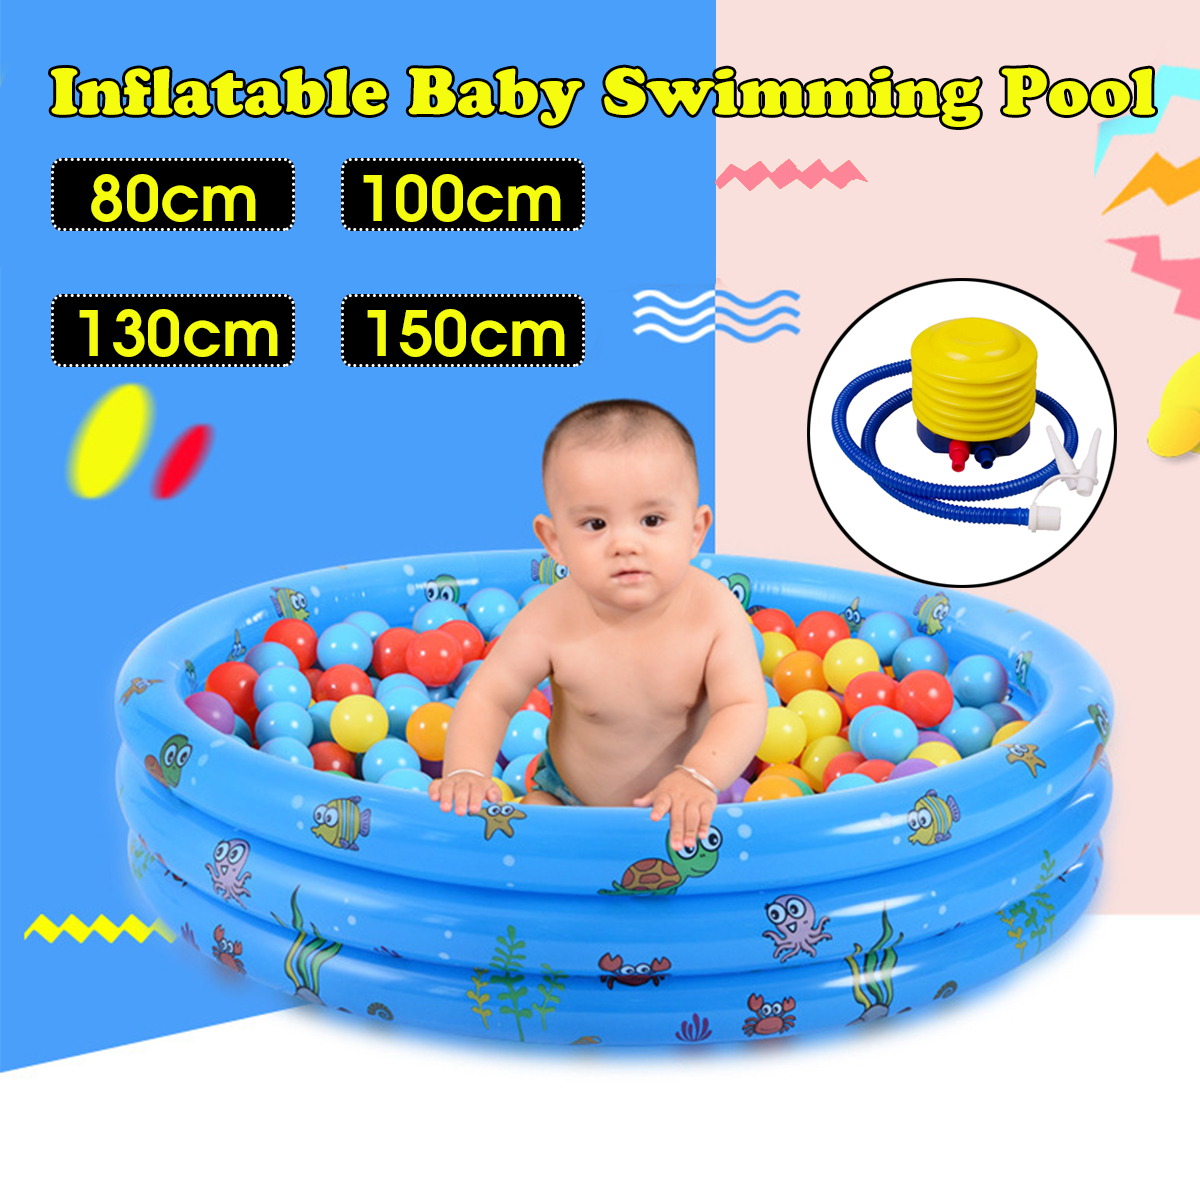 130150CM-Swimming-Pool-Childrens-Baby-Paddling-Pool-Round-Bubble-Bottom-Inflatable-Pool-with-Air-Pum-1815393-1